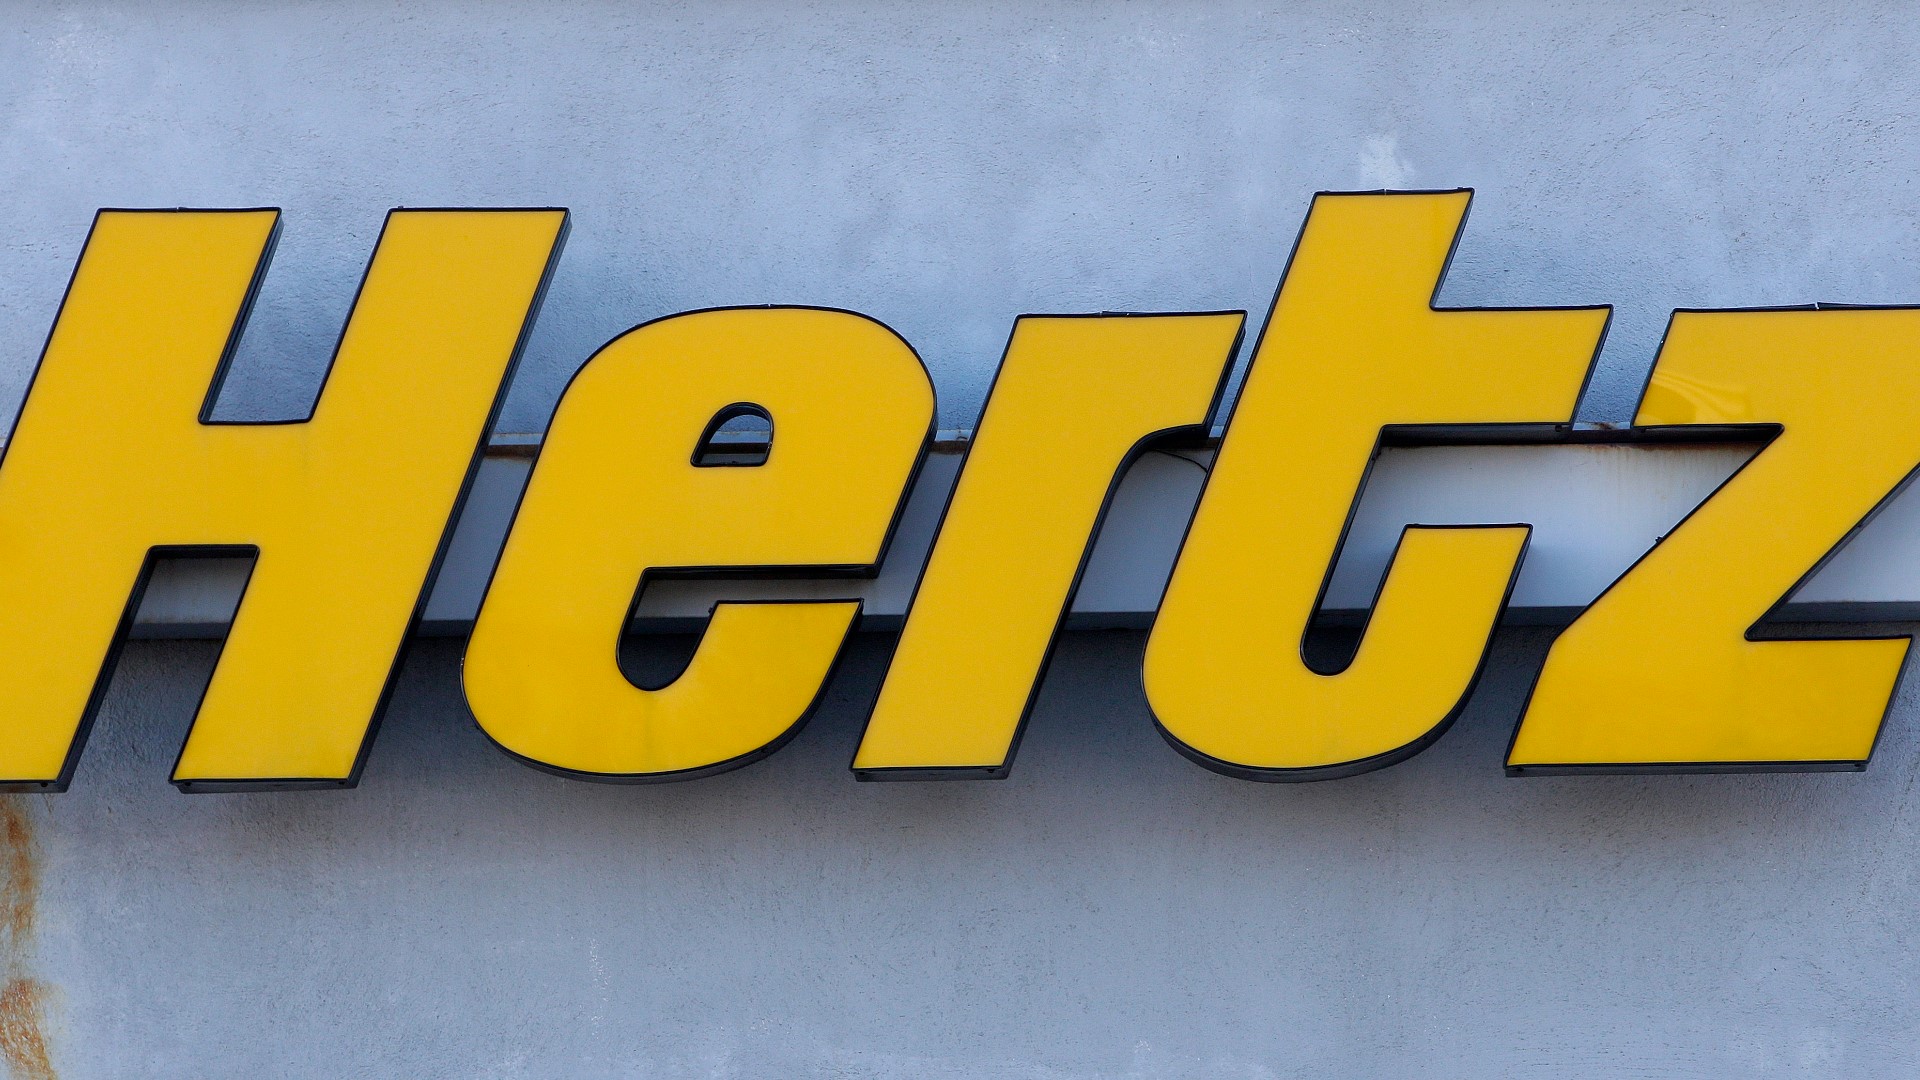 More than 200 Hertz customers are suing the car rental company, claiming false arrests after Hertz incorrectly labeled their rentals as stolen.